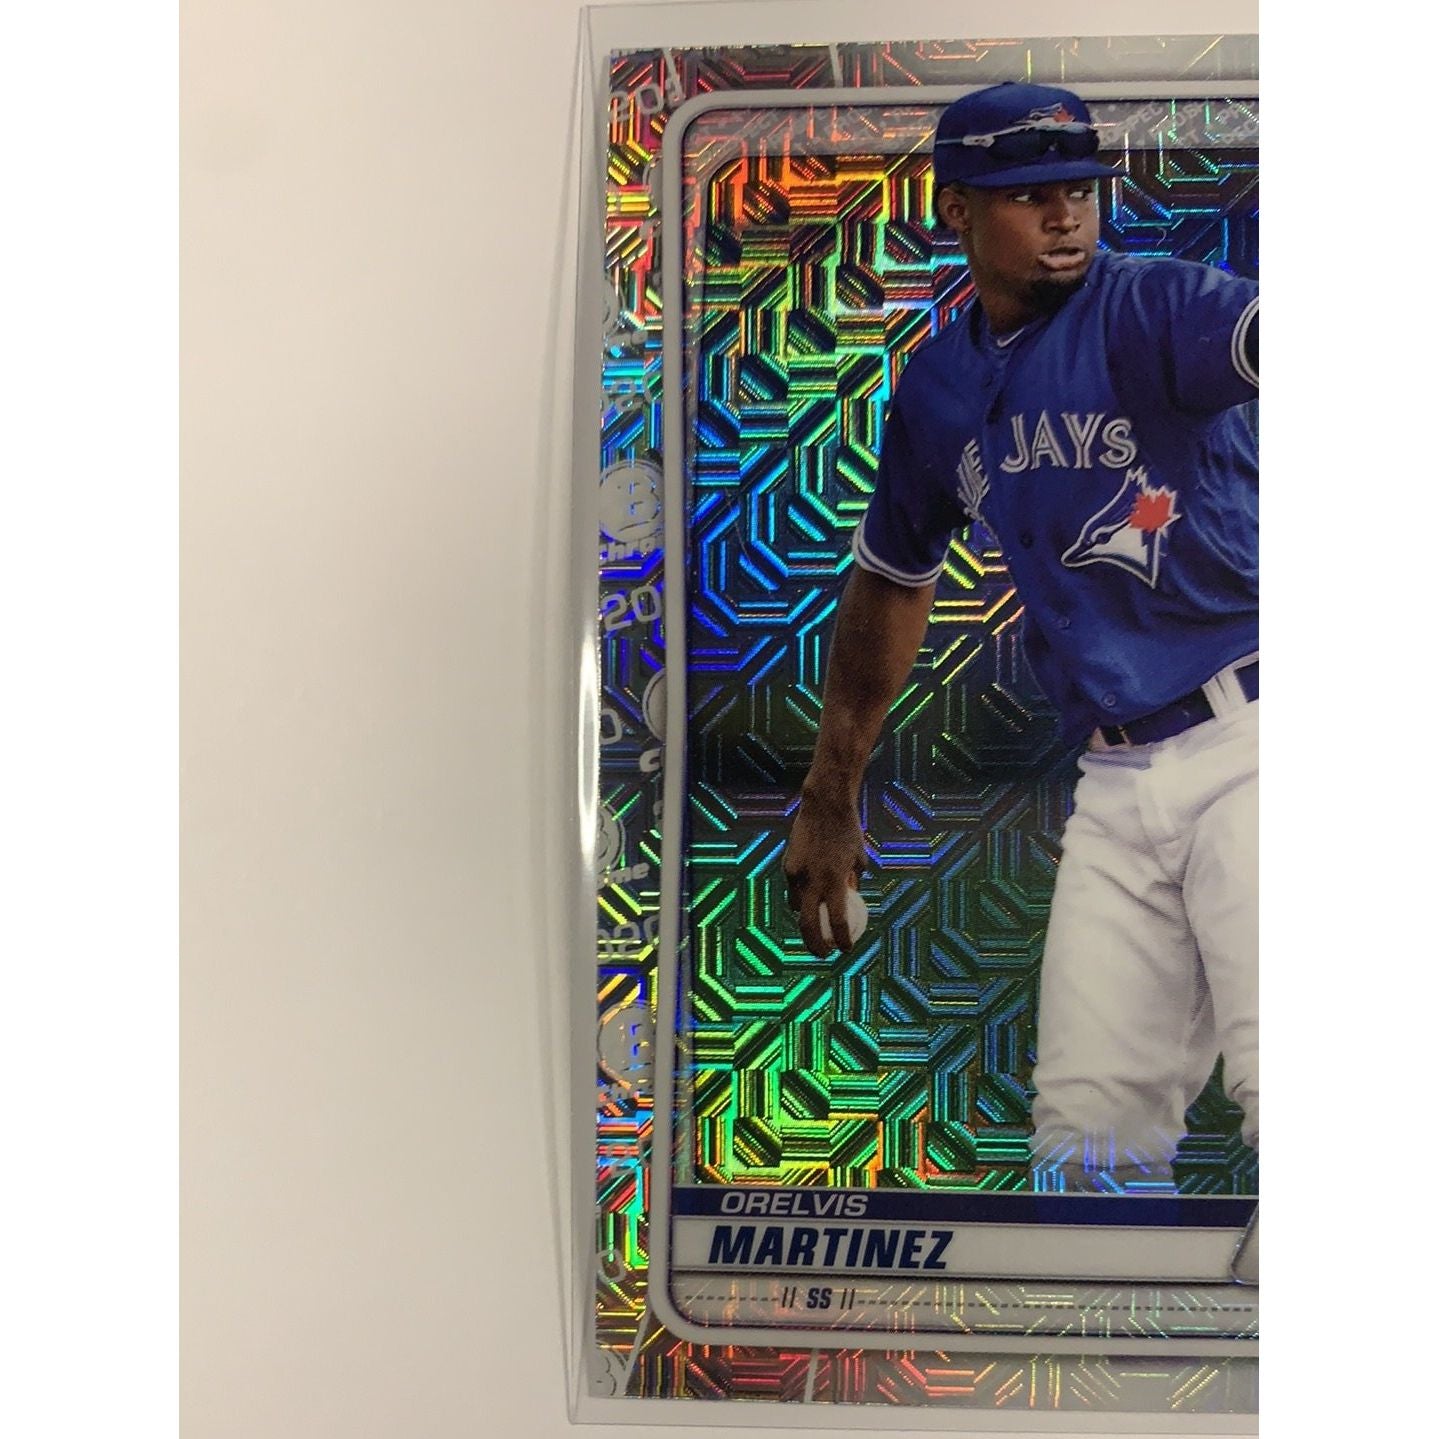  2020 Bowman Chrome Orelvis Martinez Mojo Refractor  Local Legends Cards & Collectibles